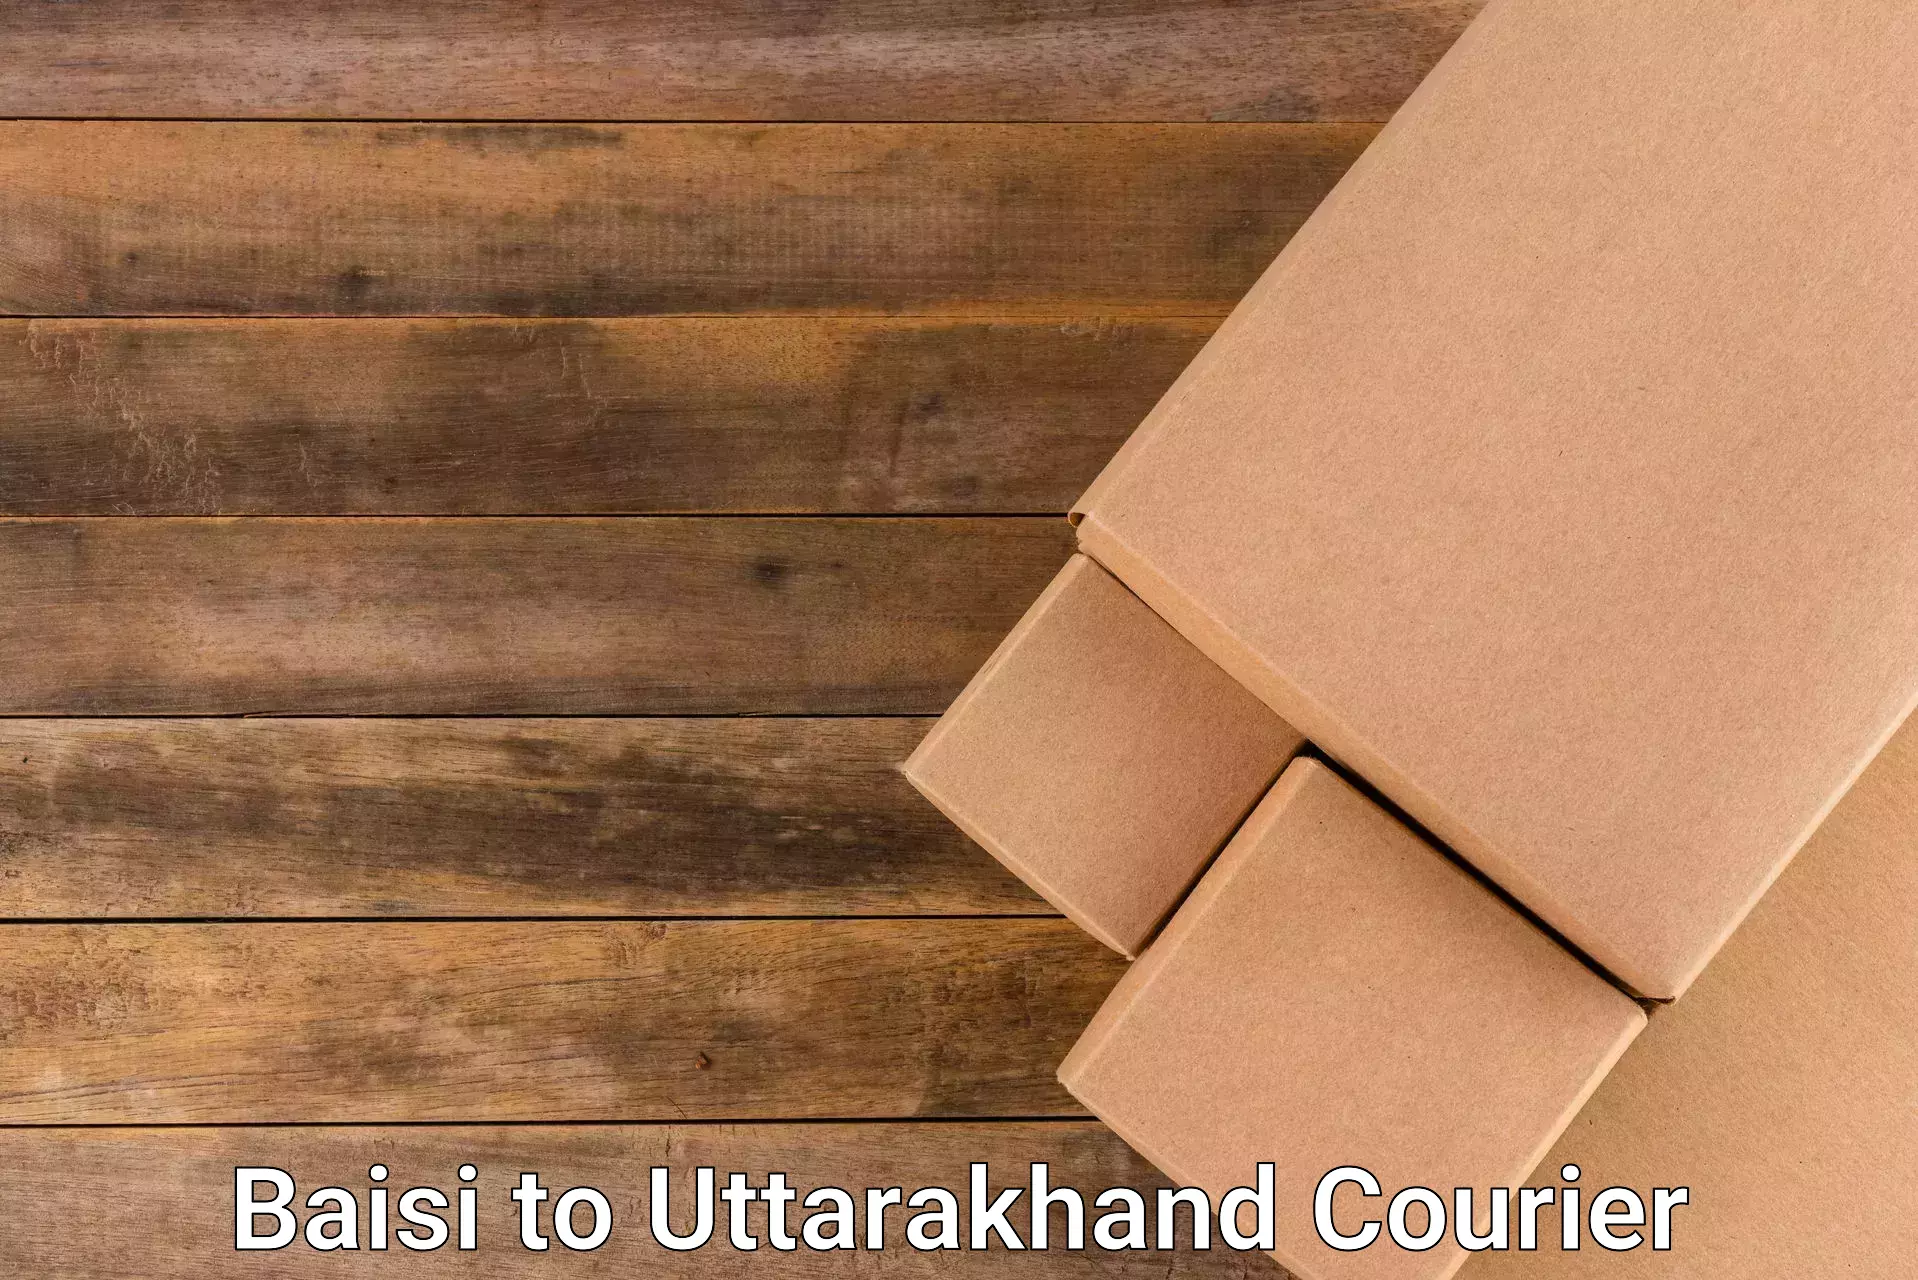 Cash on delivery service in Baisi to Uttarakhand